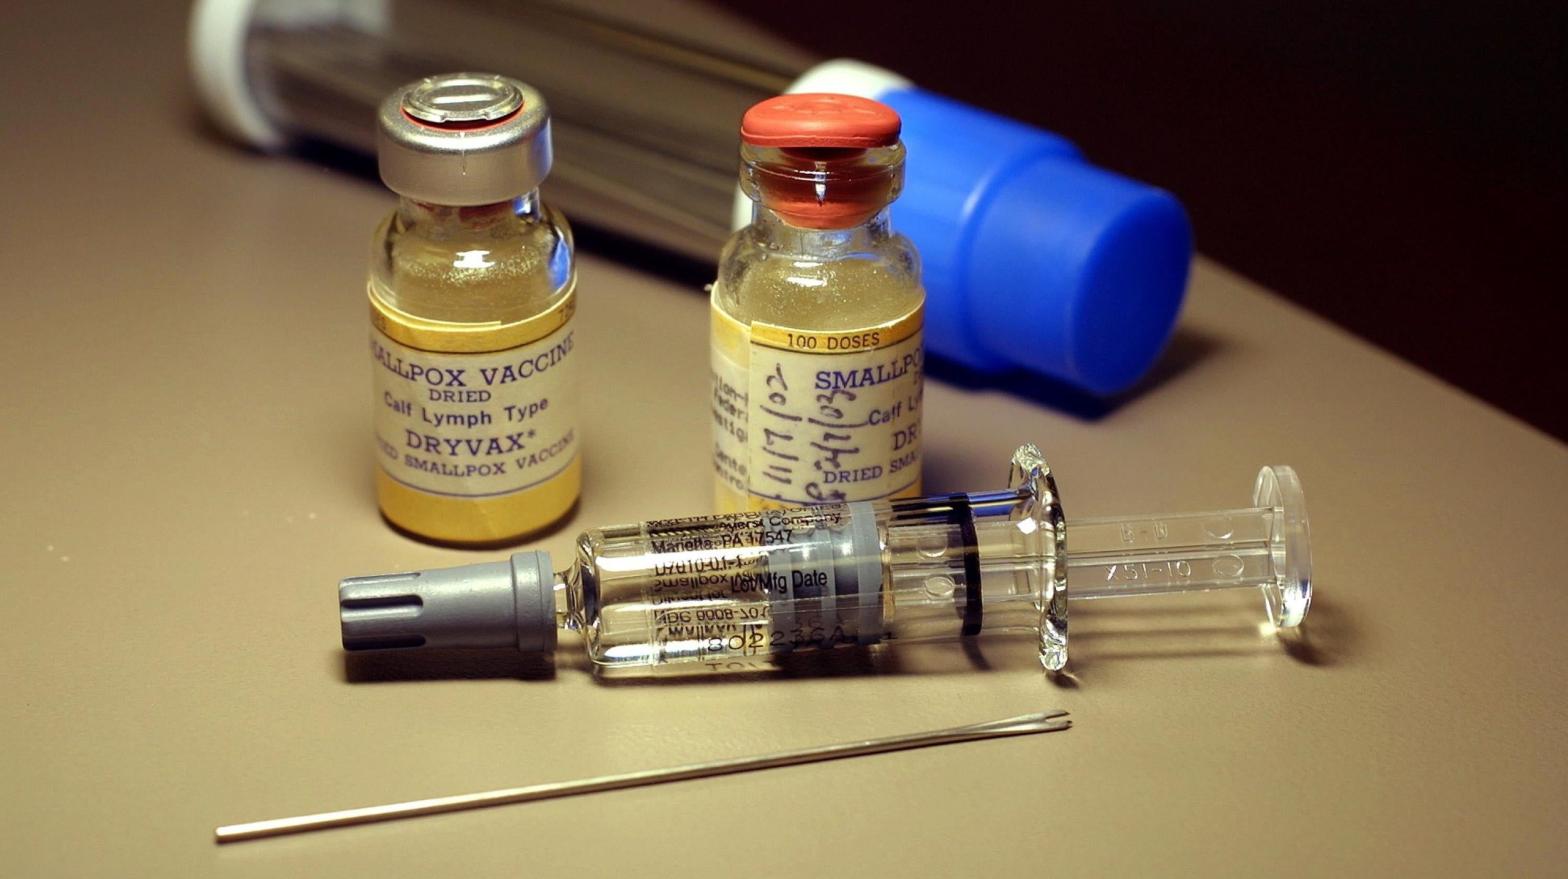 Vials of smallpox vaccine sit on a counter before a vaccination December 16, 2002 at Mid-Florida Biologicals in Altamonte Springs, Florida (Photo: Chris Livingston, Getty Images)